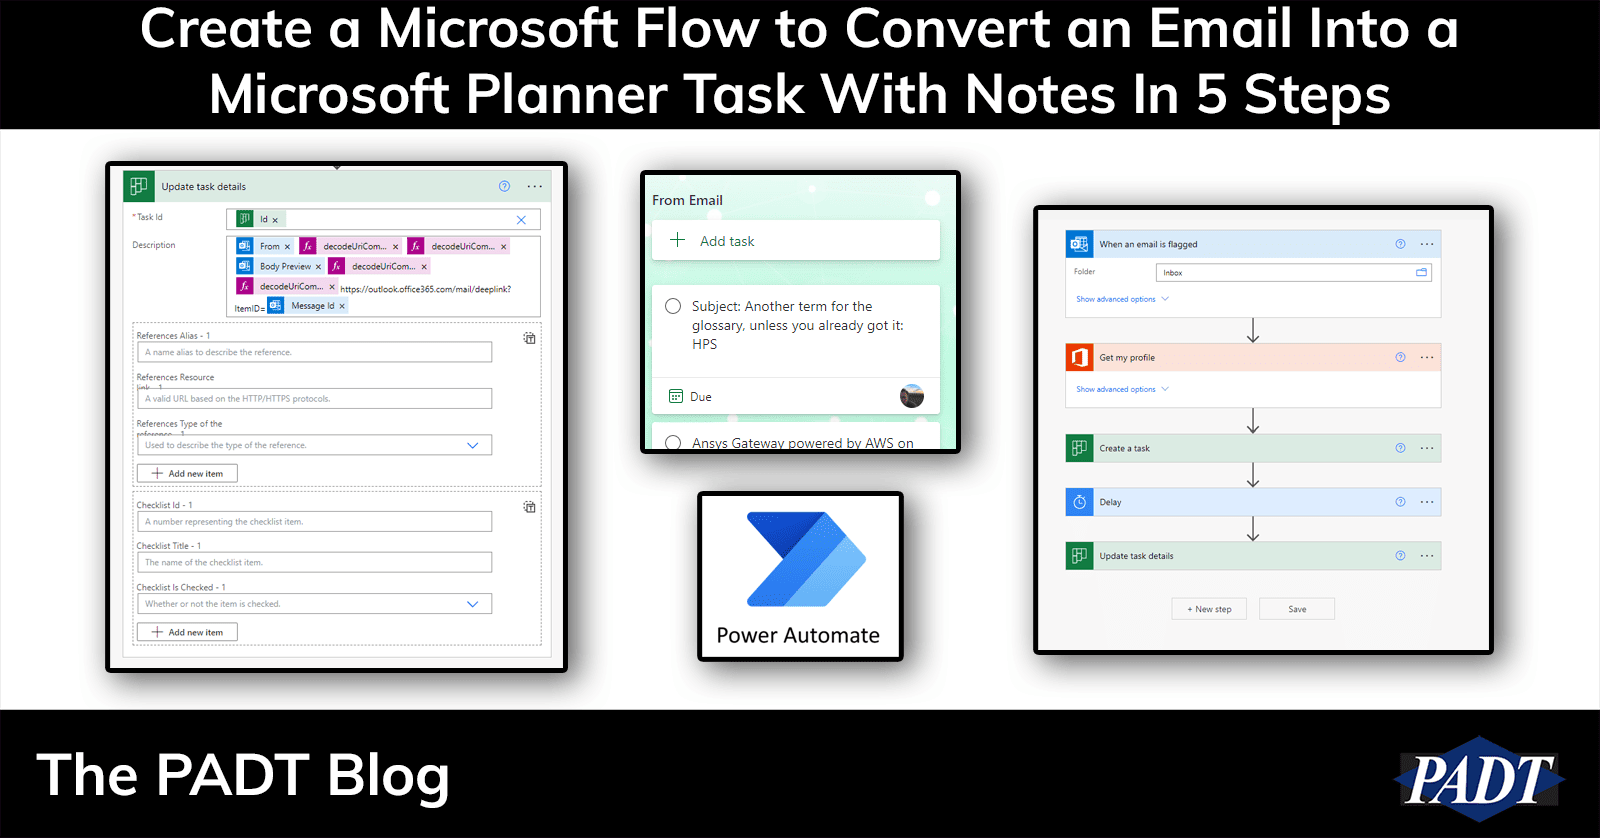 Microsoft Flow for Email to Planner Task